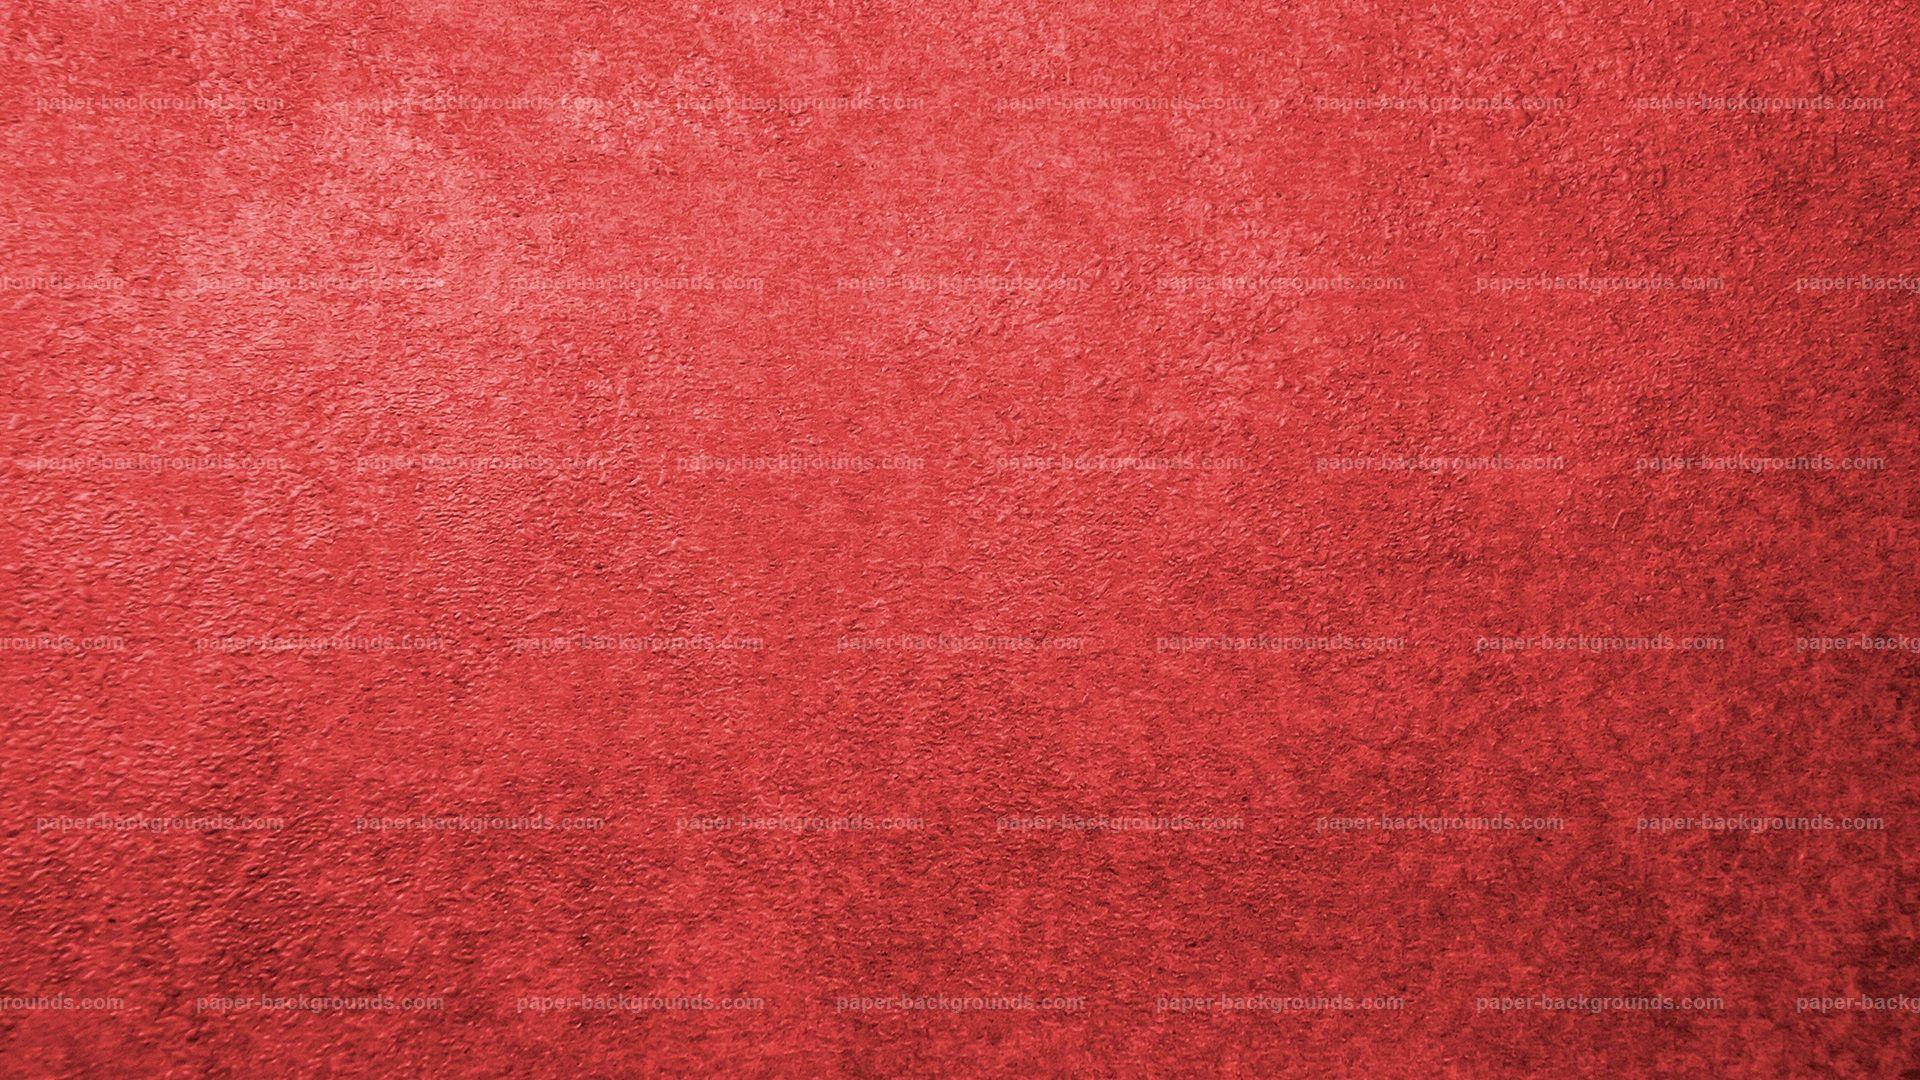 Paper Background. Red Wall Texture Vintage Background HD